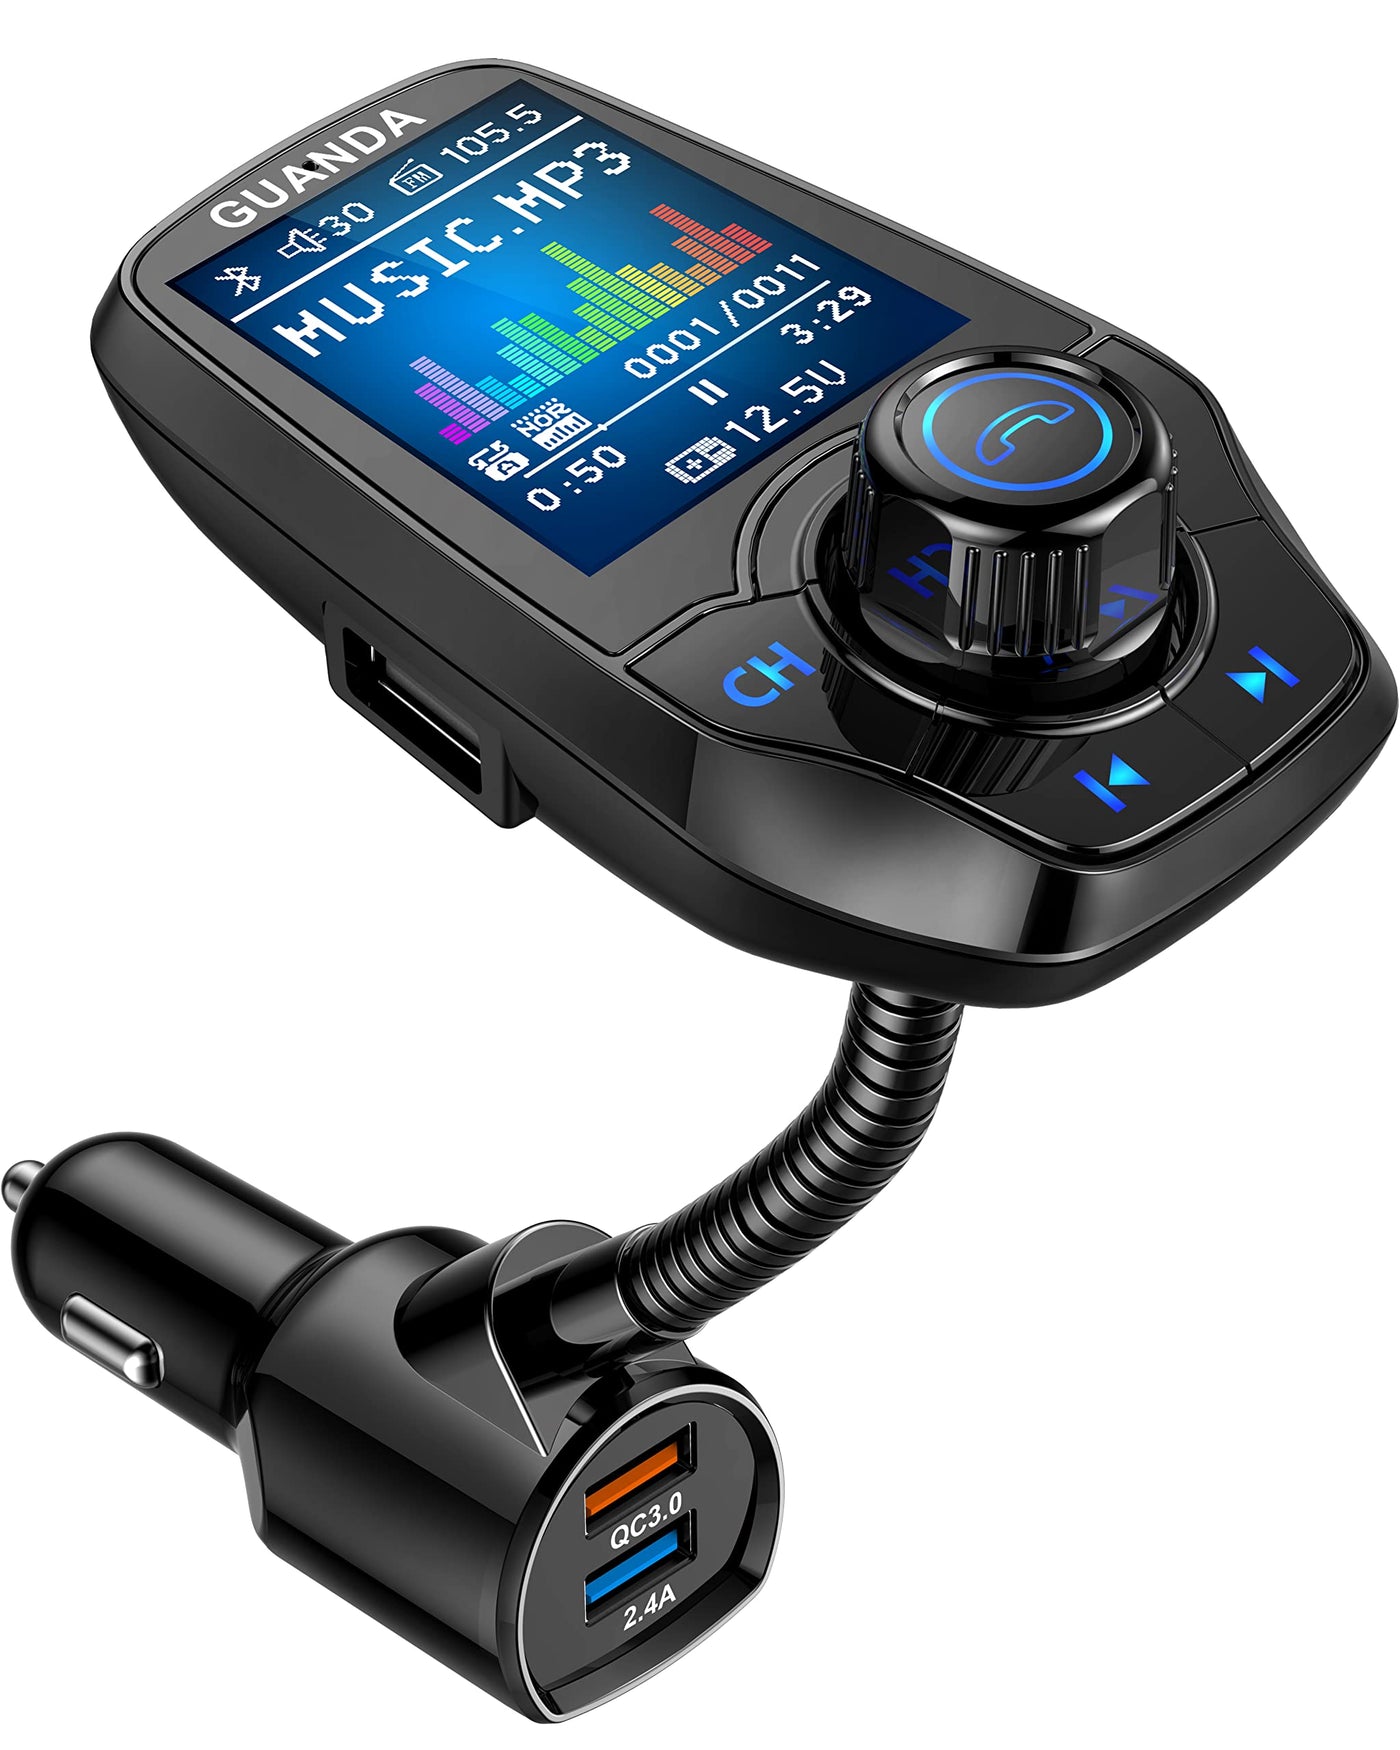 Bluetooth FM Transmitter in-Car Wireless Radio Adapter Kit W 1.8 Color  Display Hands-Free Call AUX in/Out SD/TF Card USB Charger QC3.0 for All  Smartphones Audio Players - RM100 Black Large Port-USB A